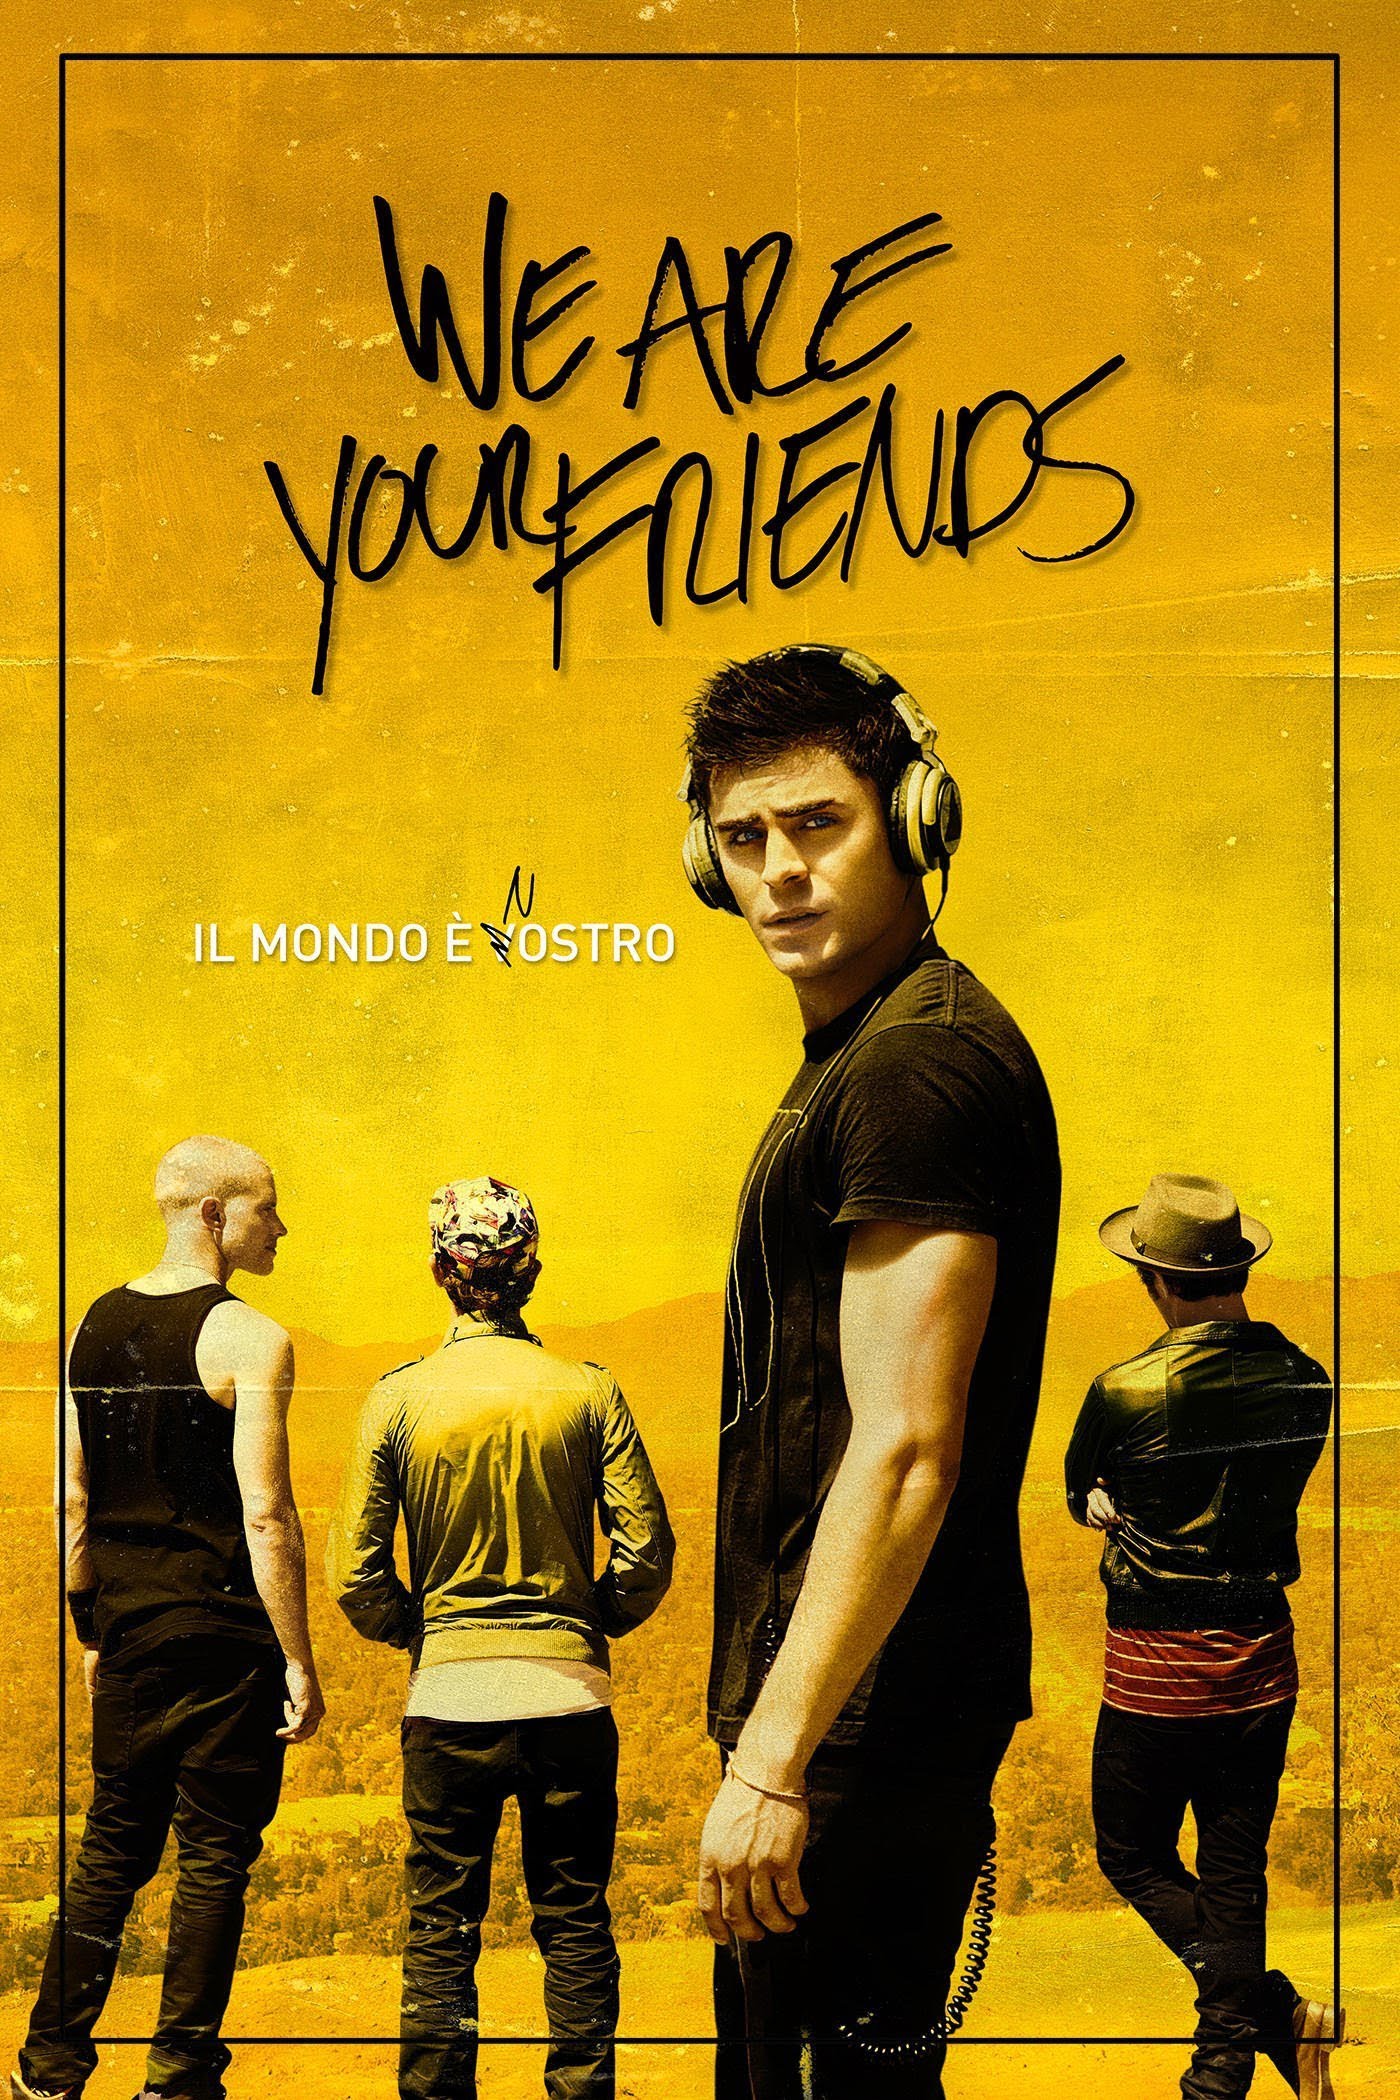 We are your friends [HD] (2015)